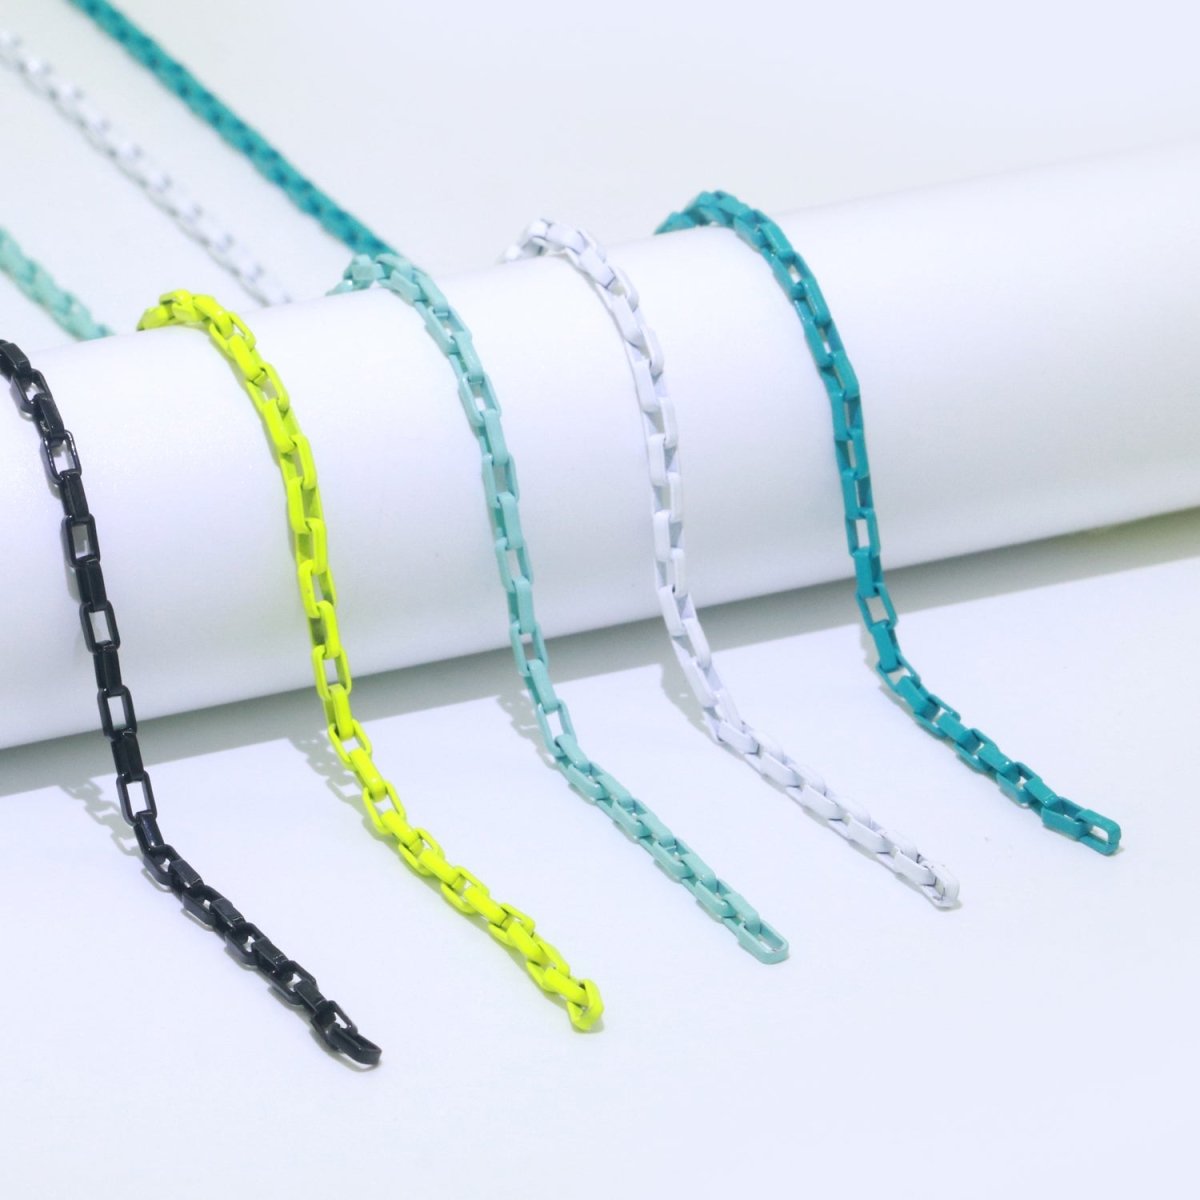 Enamel Paper Clip Cable Link Elongated Chain by Yard, Summer Colorful Chain Supply, Wholesale Bulk Roll Unfinished Chain For Jewelry Making | ROLL-541, ROLL-542, ROLL-548, ROLL-549, ROLL-550 Clearance Pricing - DLUXCA